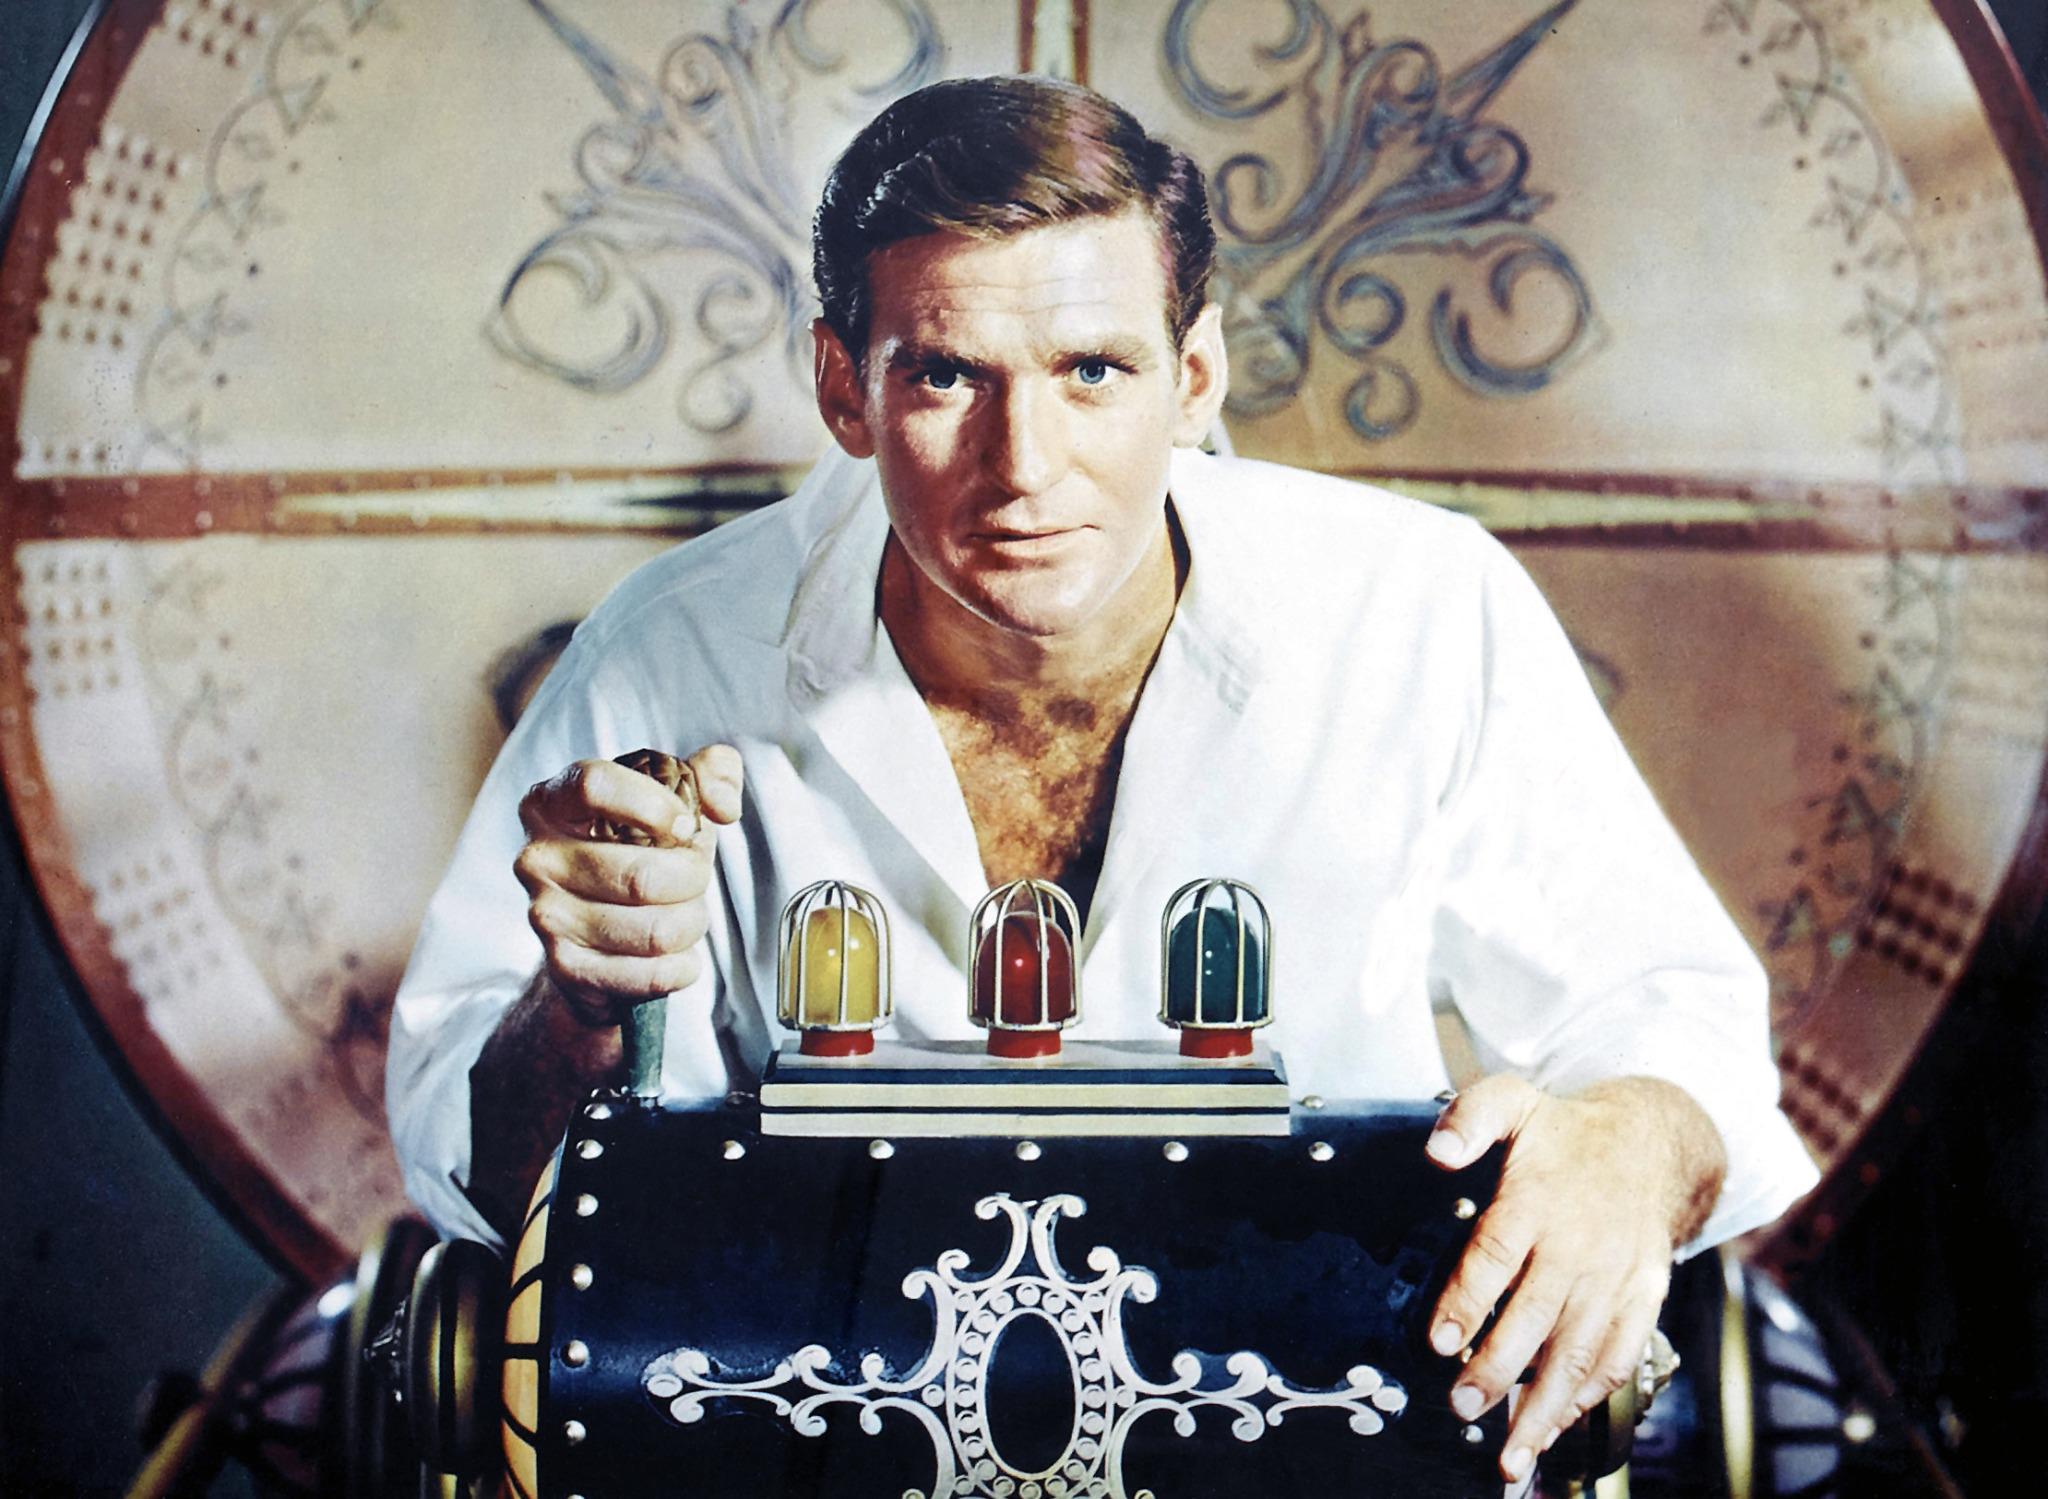 Happy birthday to the late Rod Taylor. Had he not passed four days ago, he would have turned 85 today. to salute! 